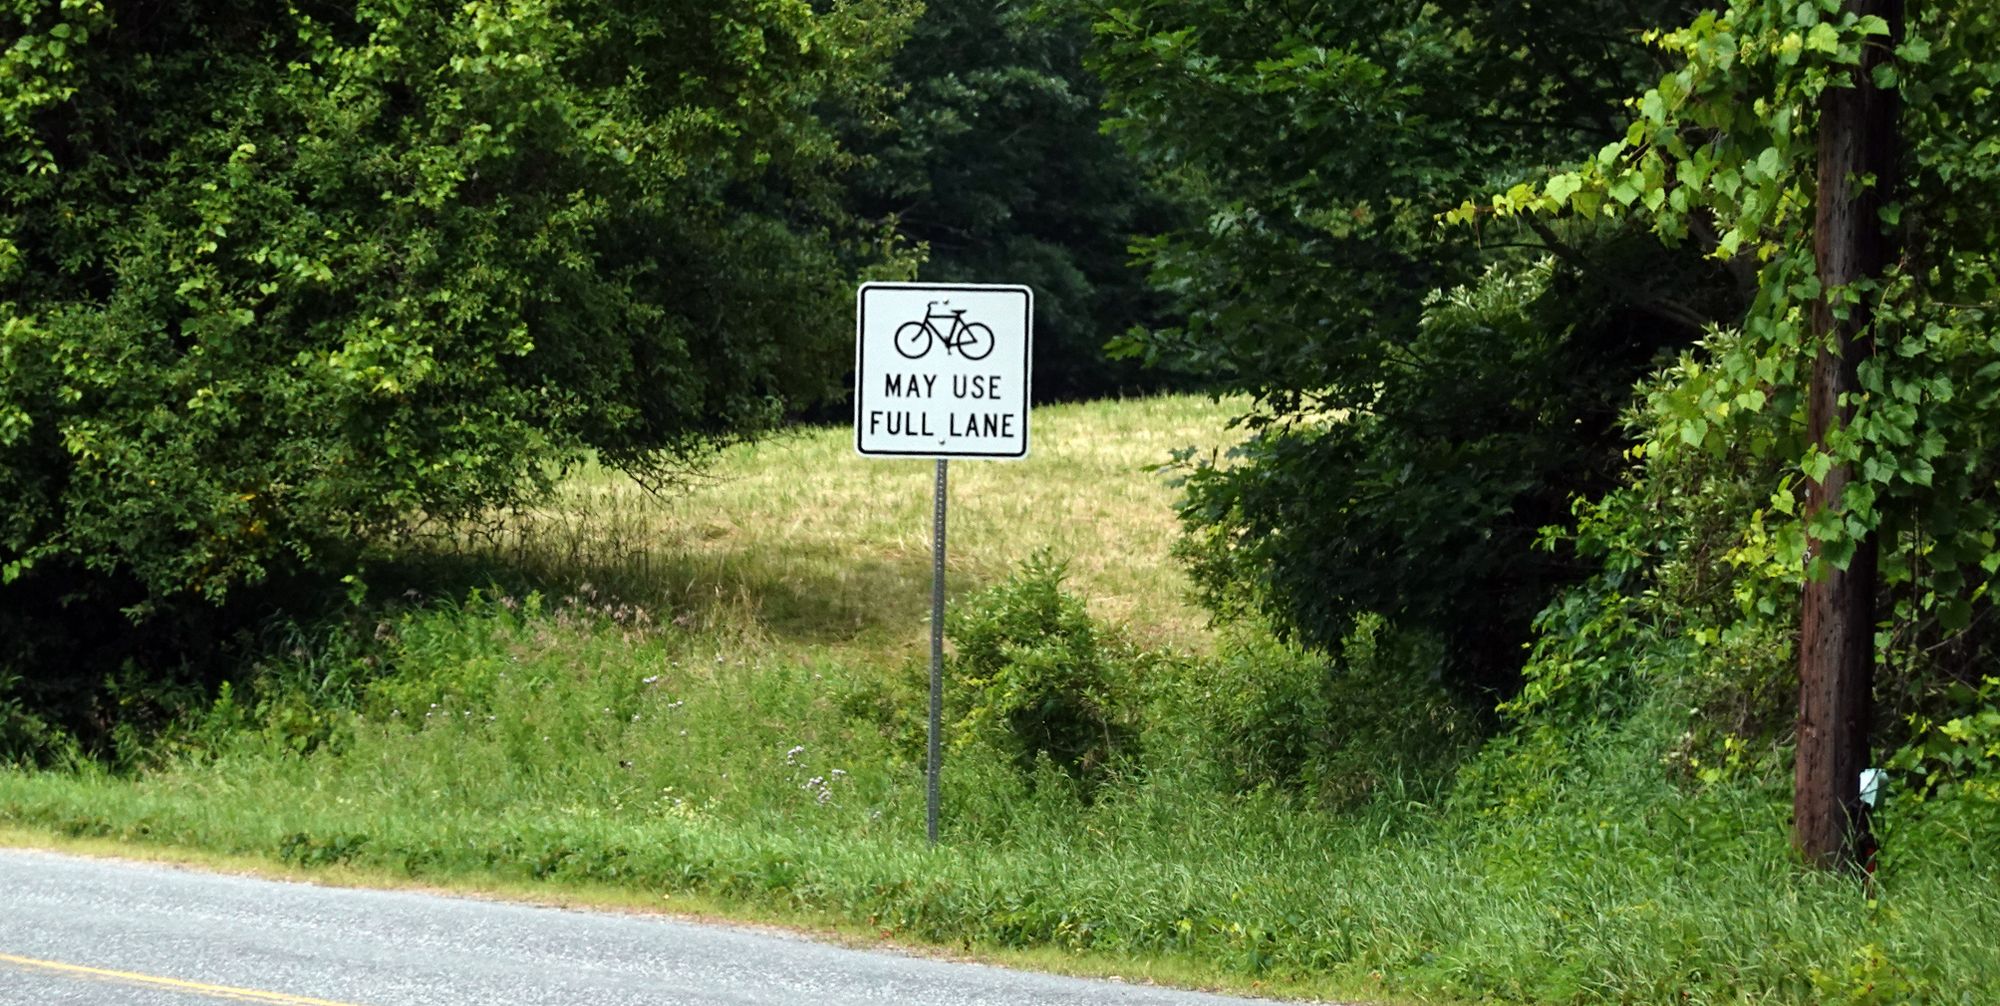 A controversial road sign